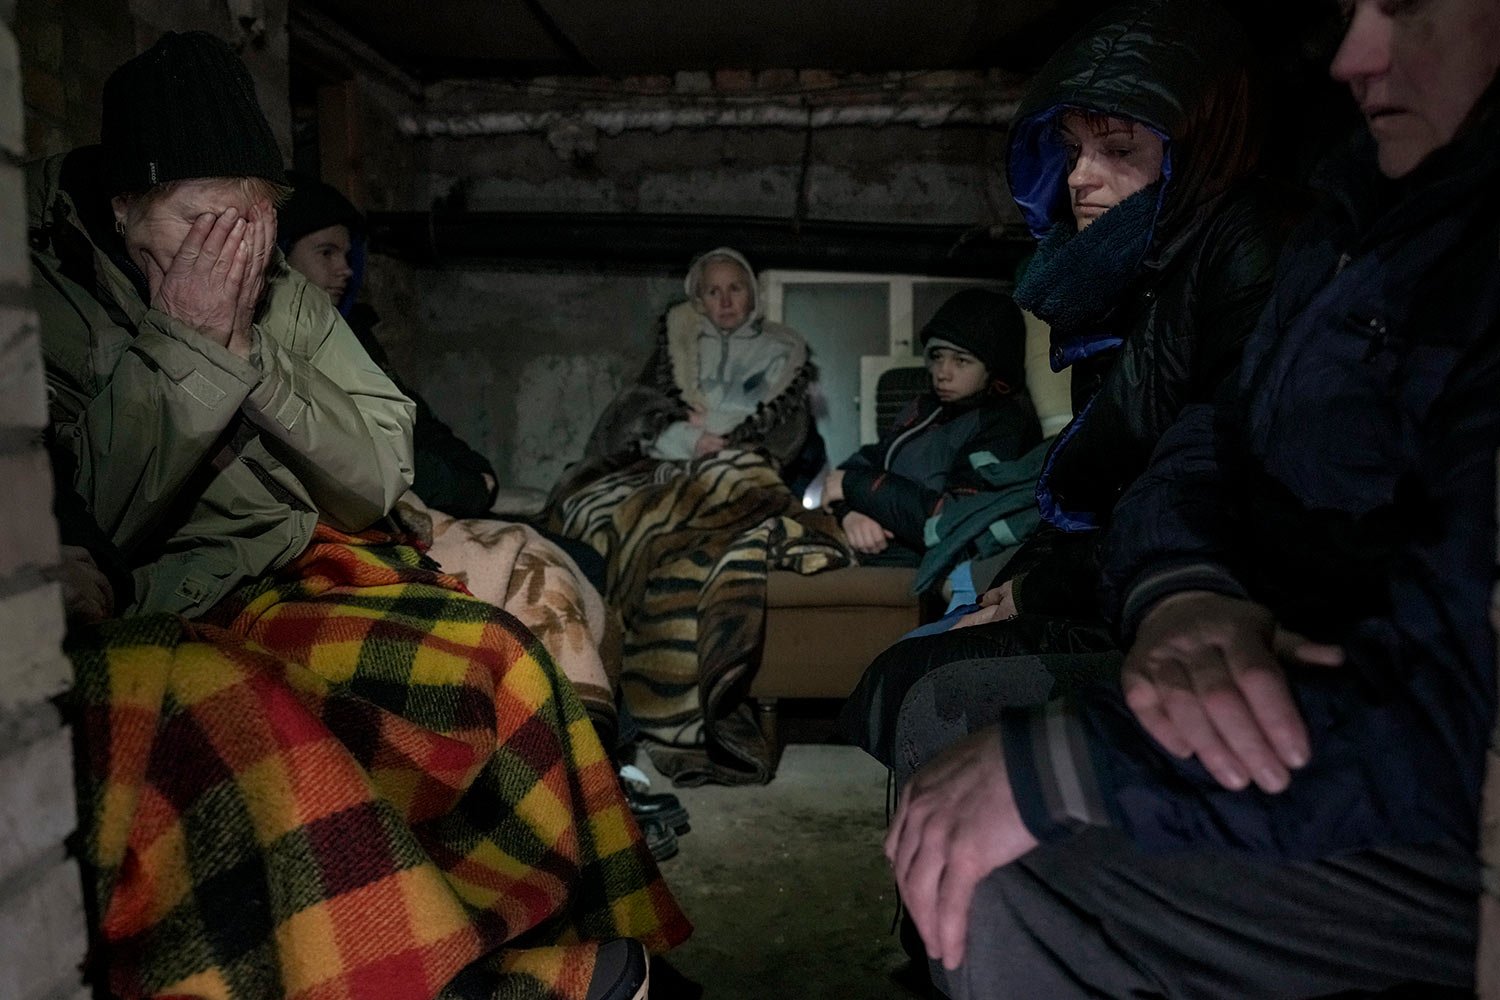  A woman cries in the small basement of a house crowded with people seeking shelter from Russian airstrikes and shelling in Gorenka, outside the capital Kyiv, Ukraine, Wednesday, March 2, 2022. (AP Photo/Vadim Ghirda) 